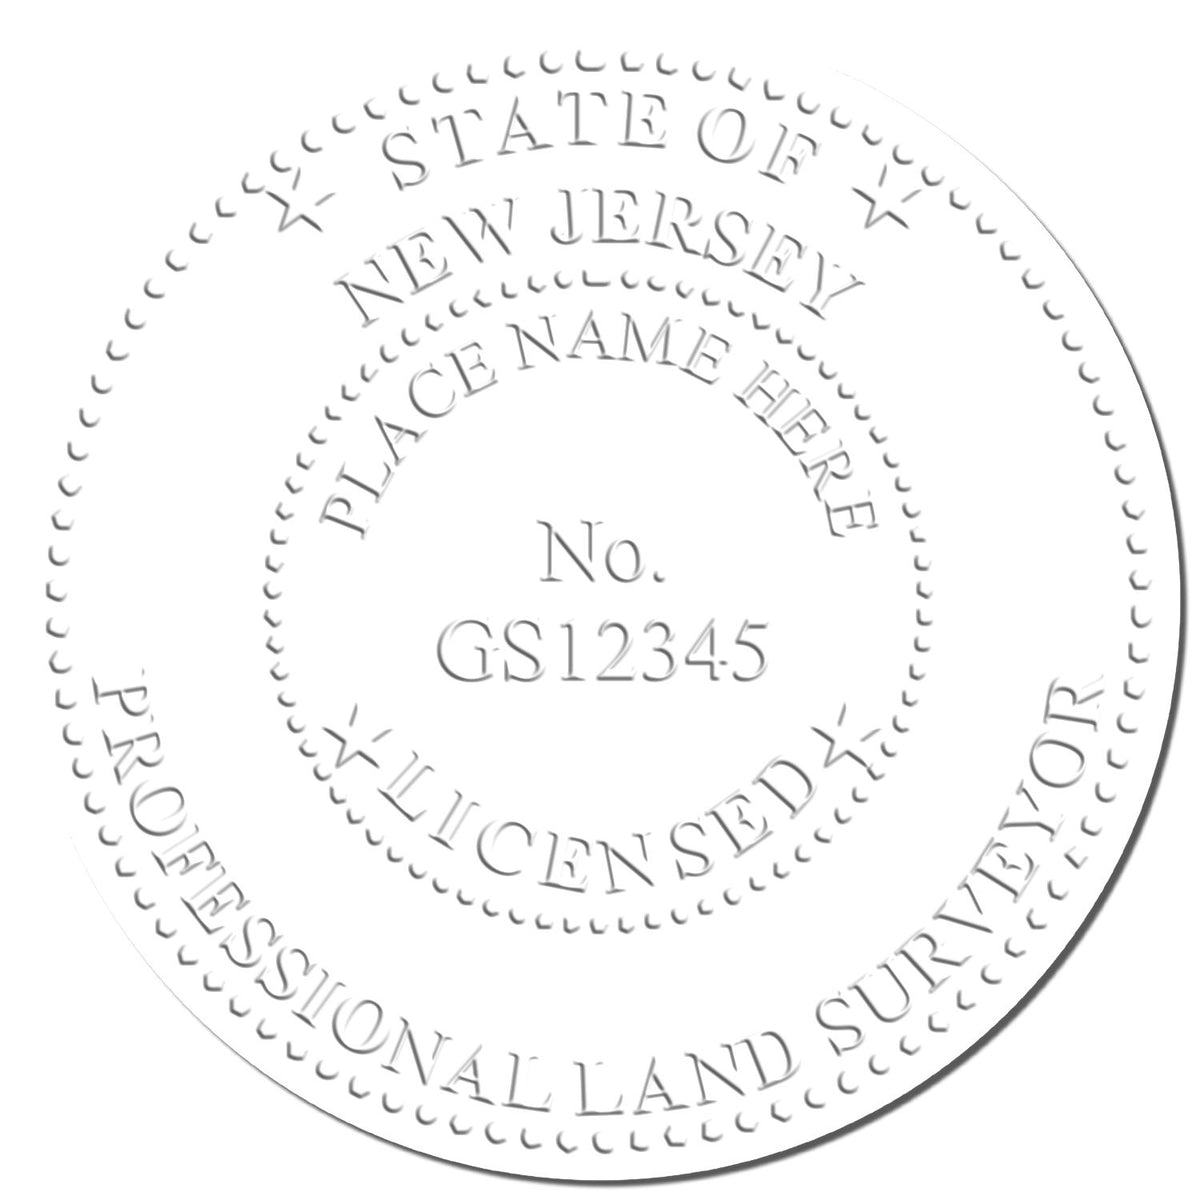 This paper is stamped with a sample imprint of the Gift New Jersey Land Surveyor Seal, signifying its quality and reliability.